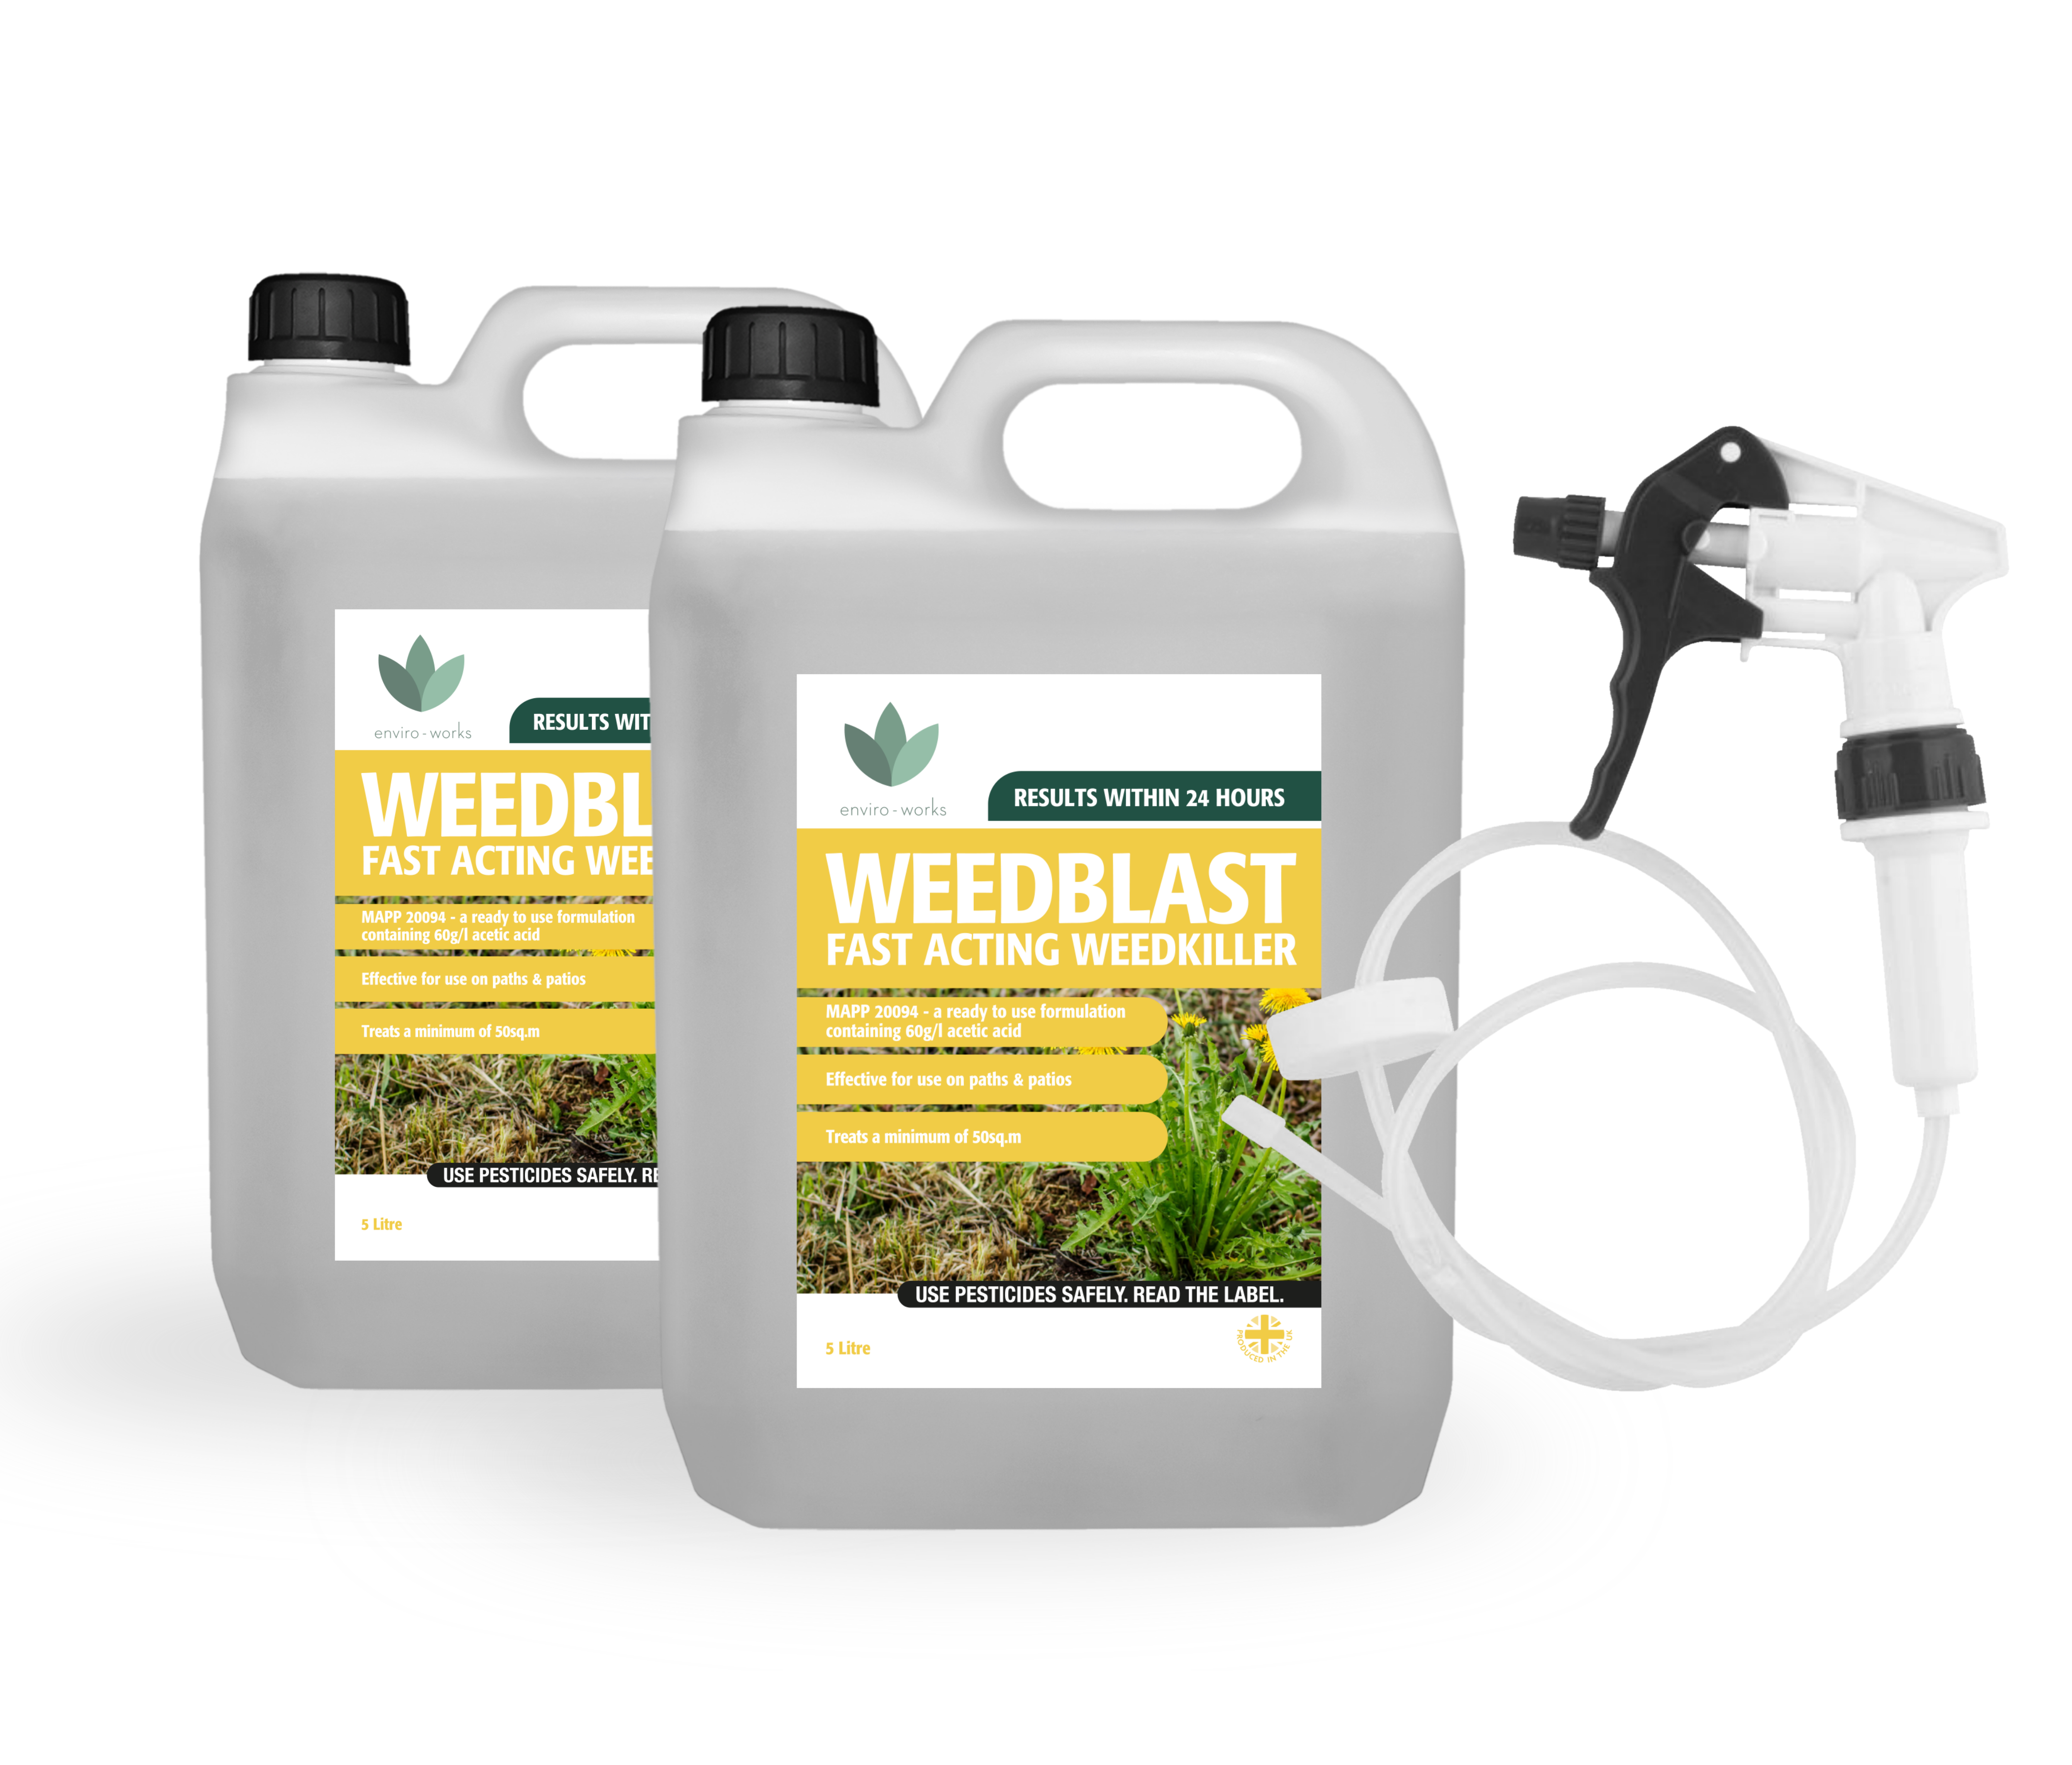 Weedblast Fast Acting Weedkiller 2 x 5 Litre with Long Hose Trigger